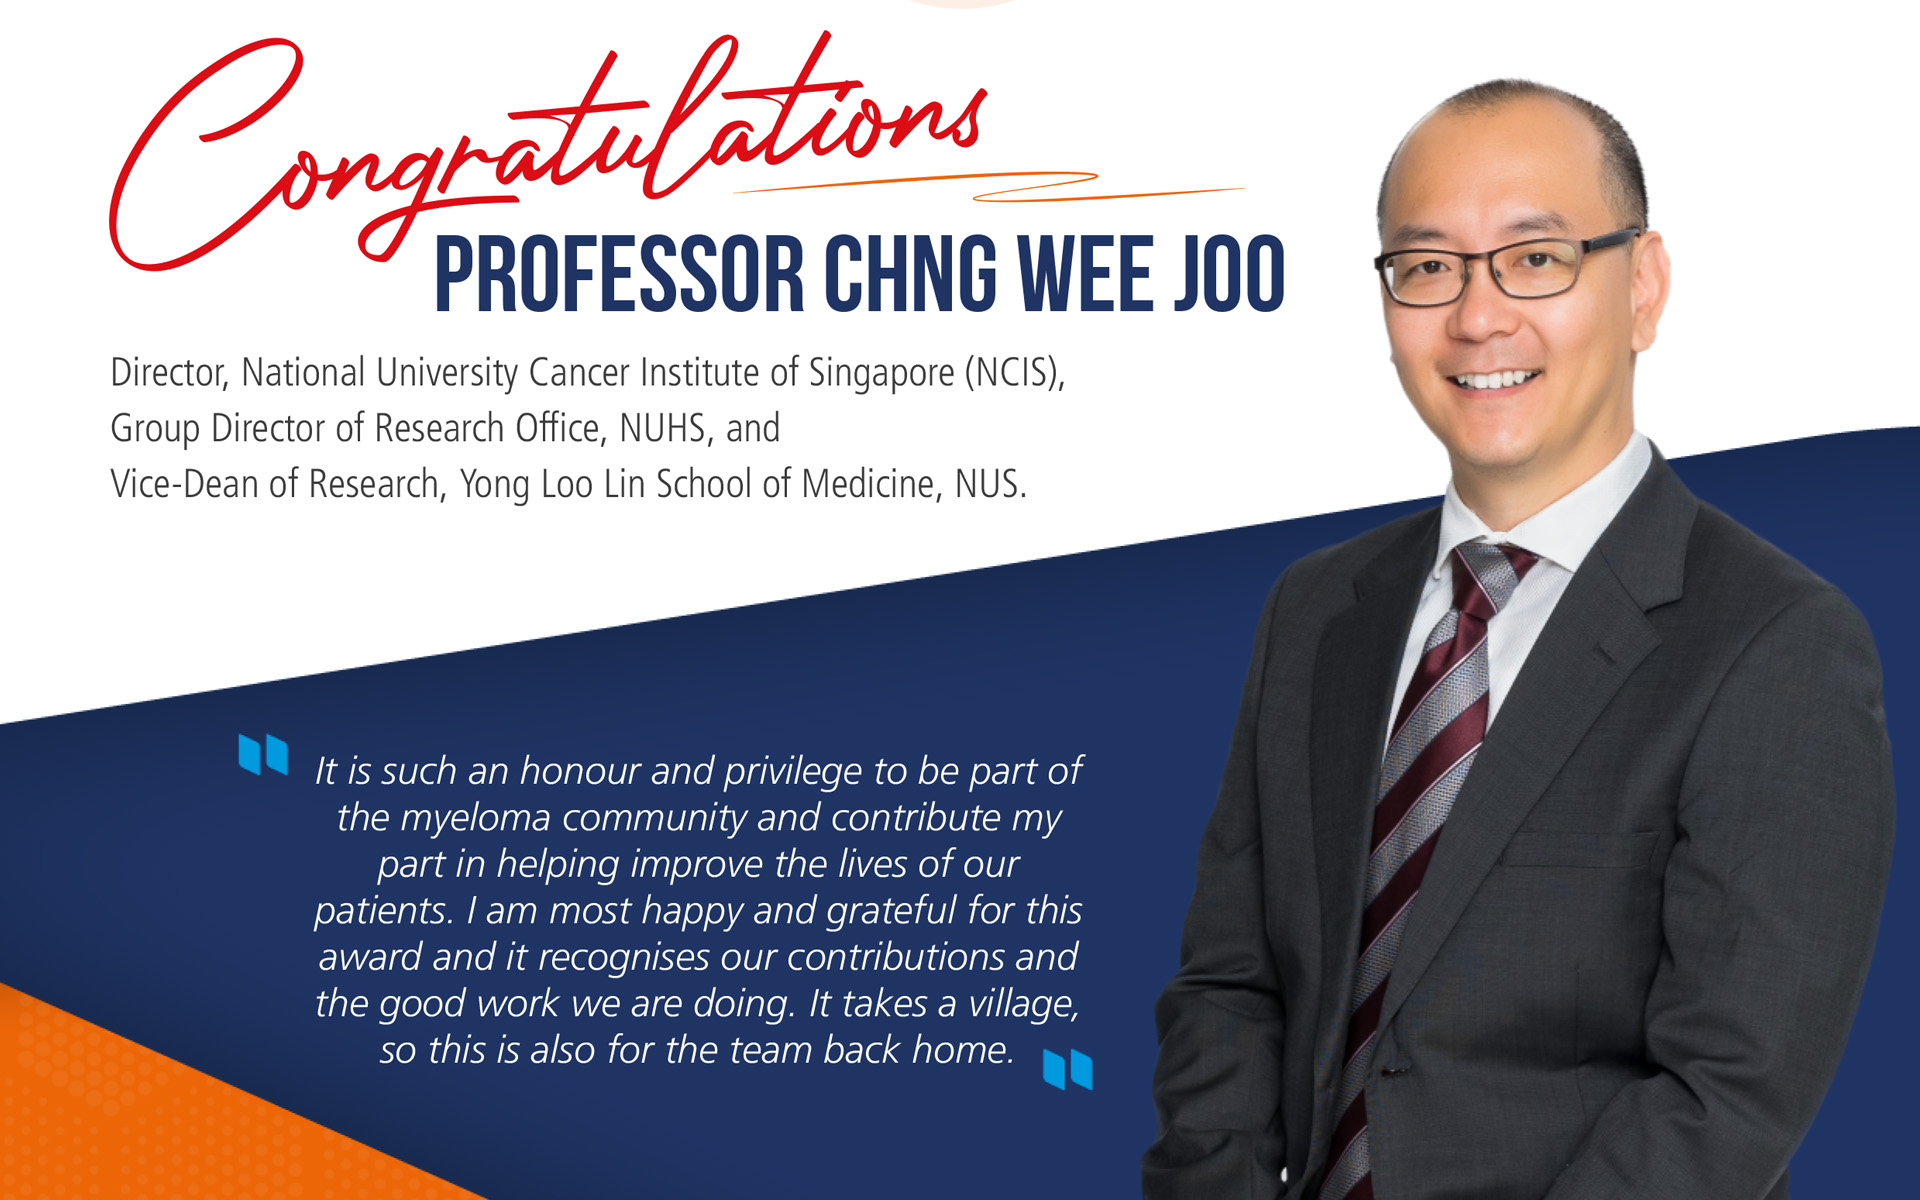 Prof Chng Wee Joo - 2020 Brian G.M. Durie Outstanding Achievement Award